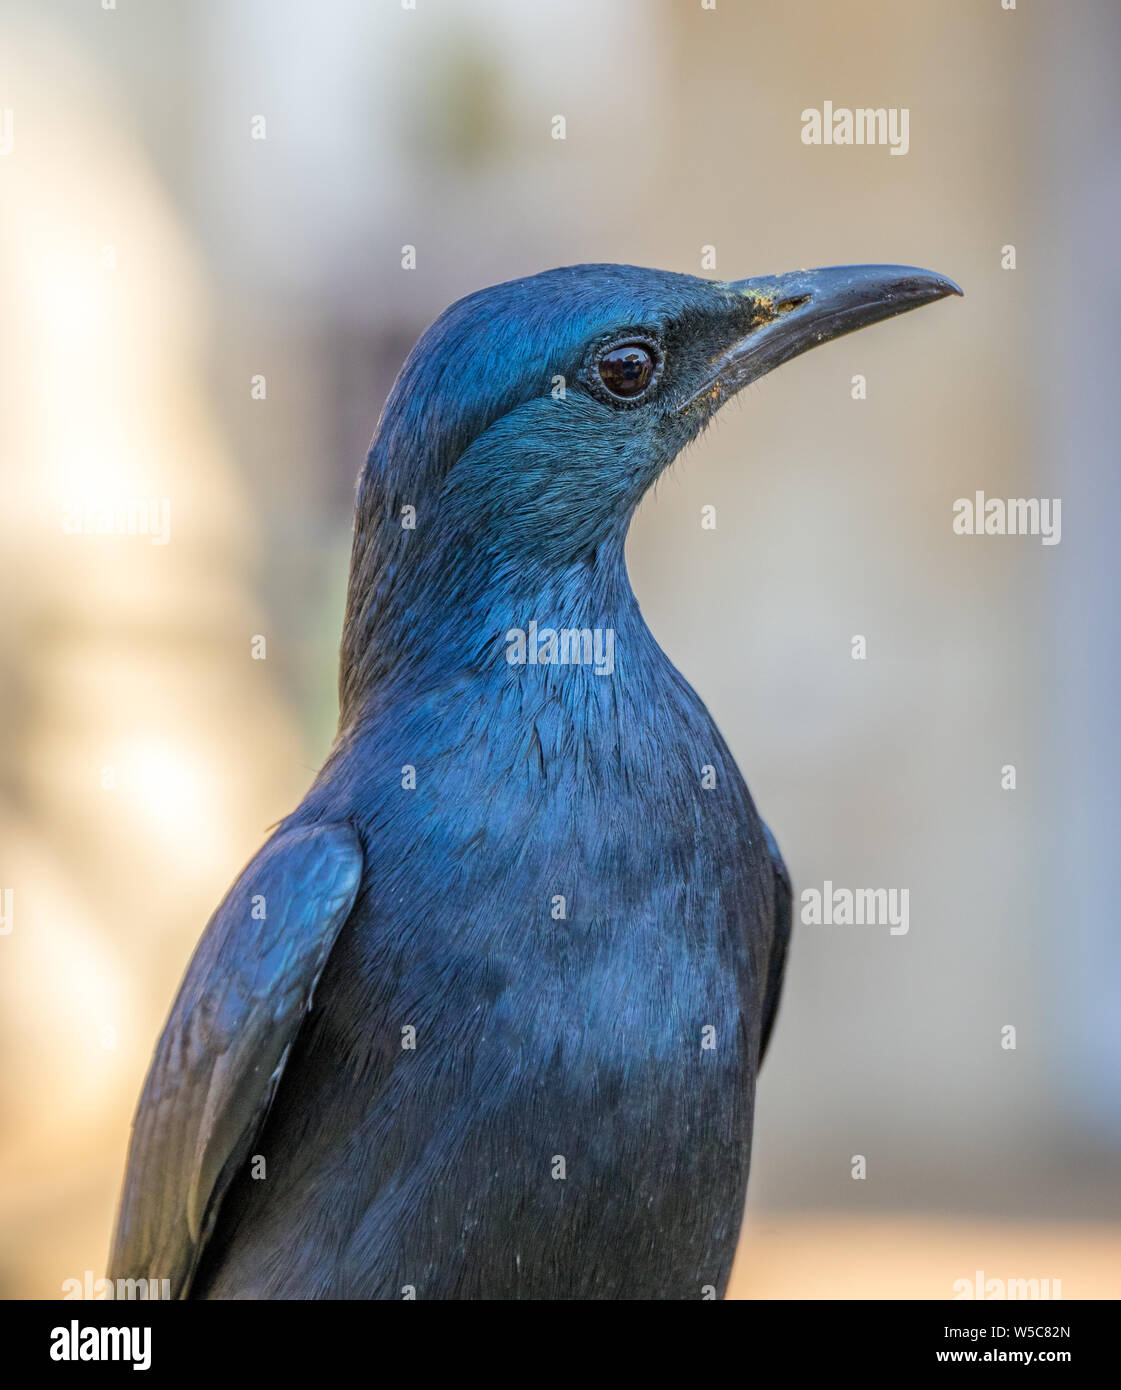 Portrait of a red-winged starling image in portrait format up close with detail Stock Photo